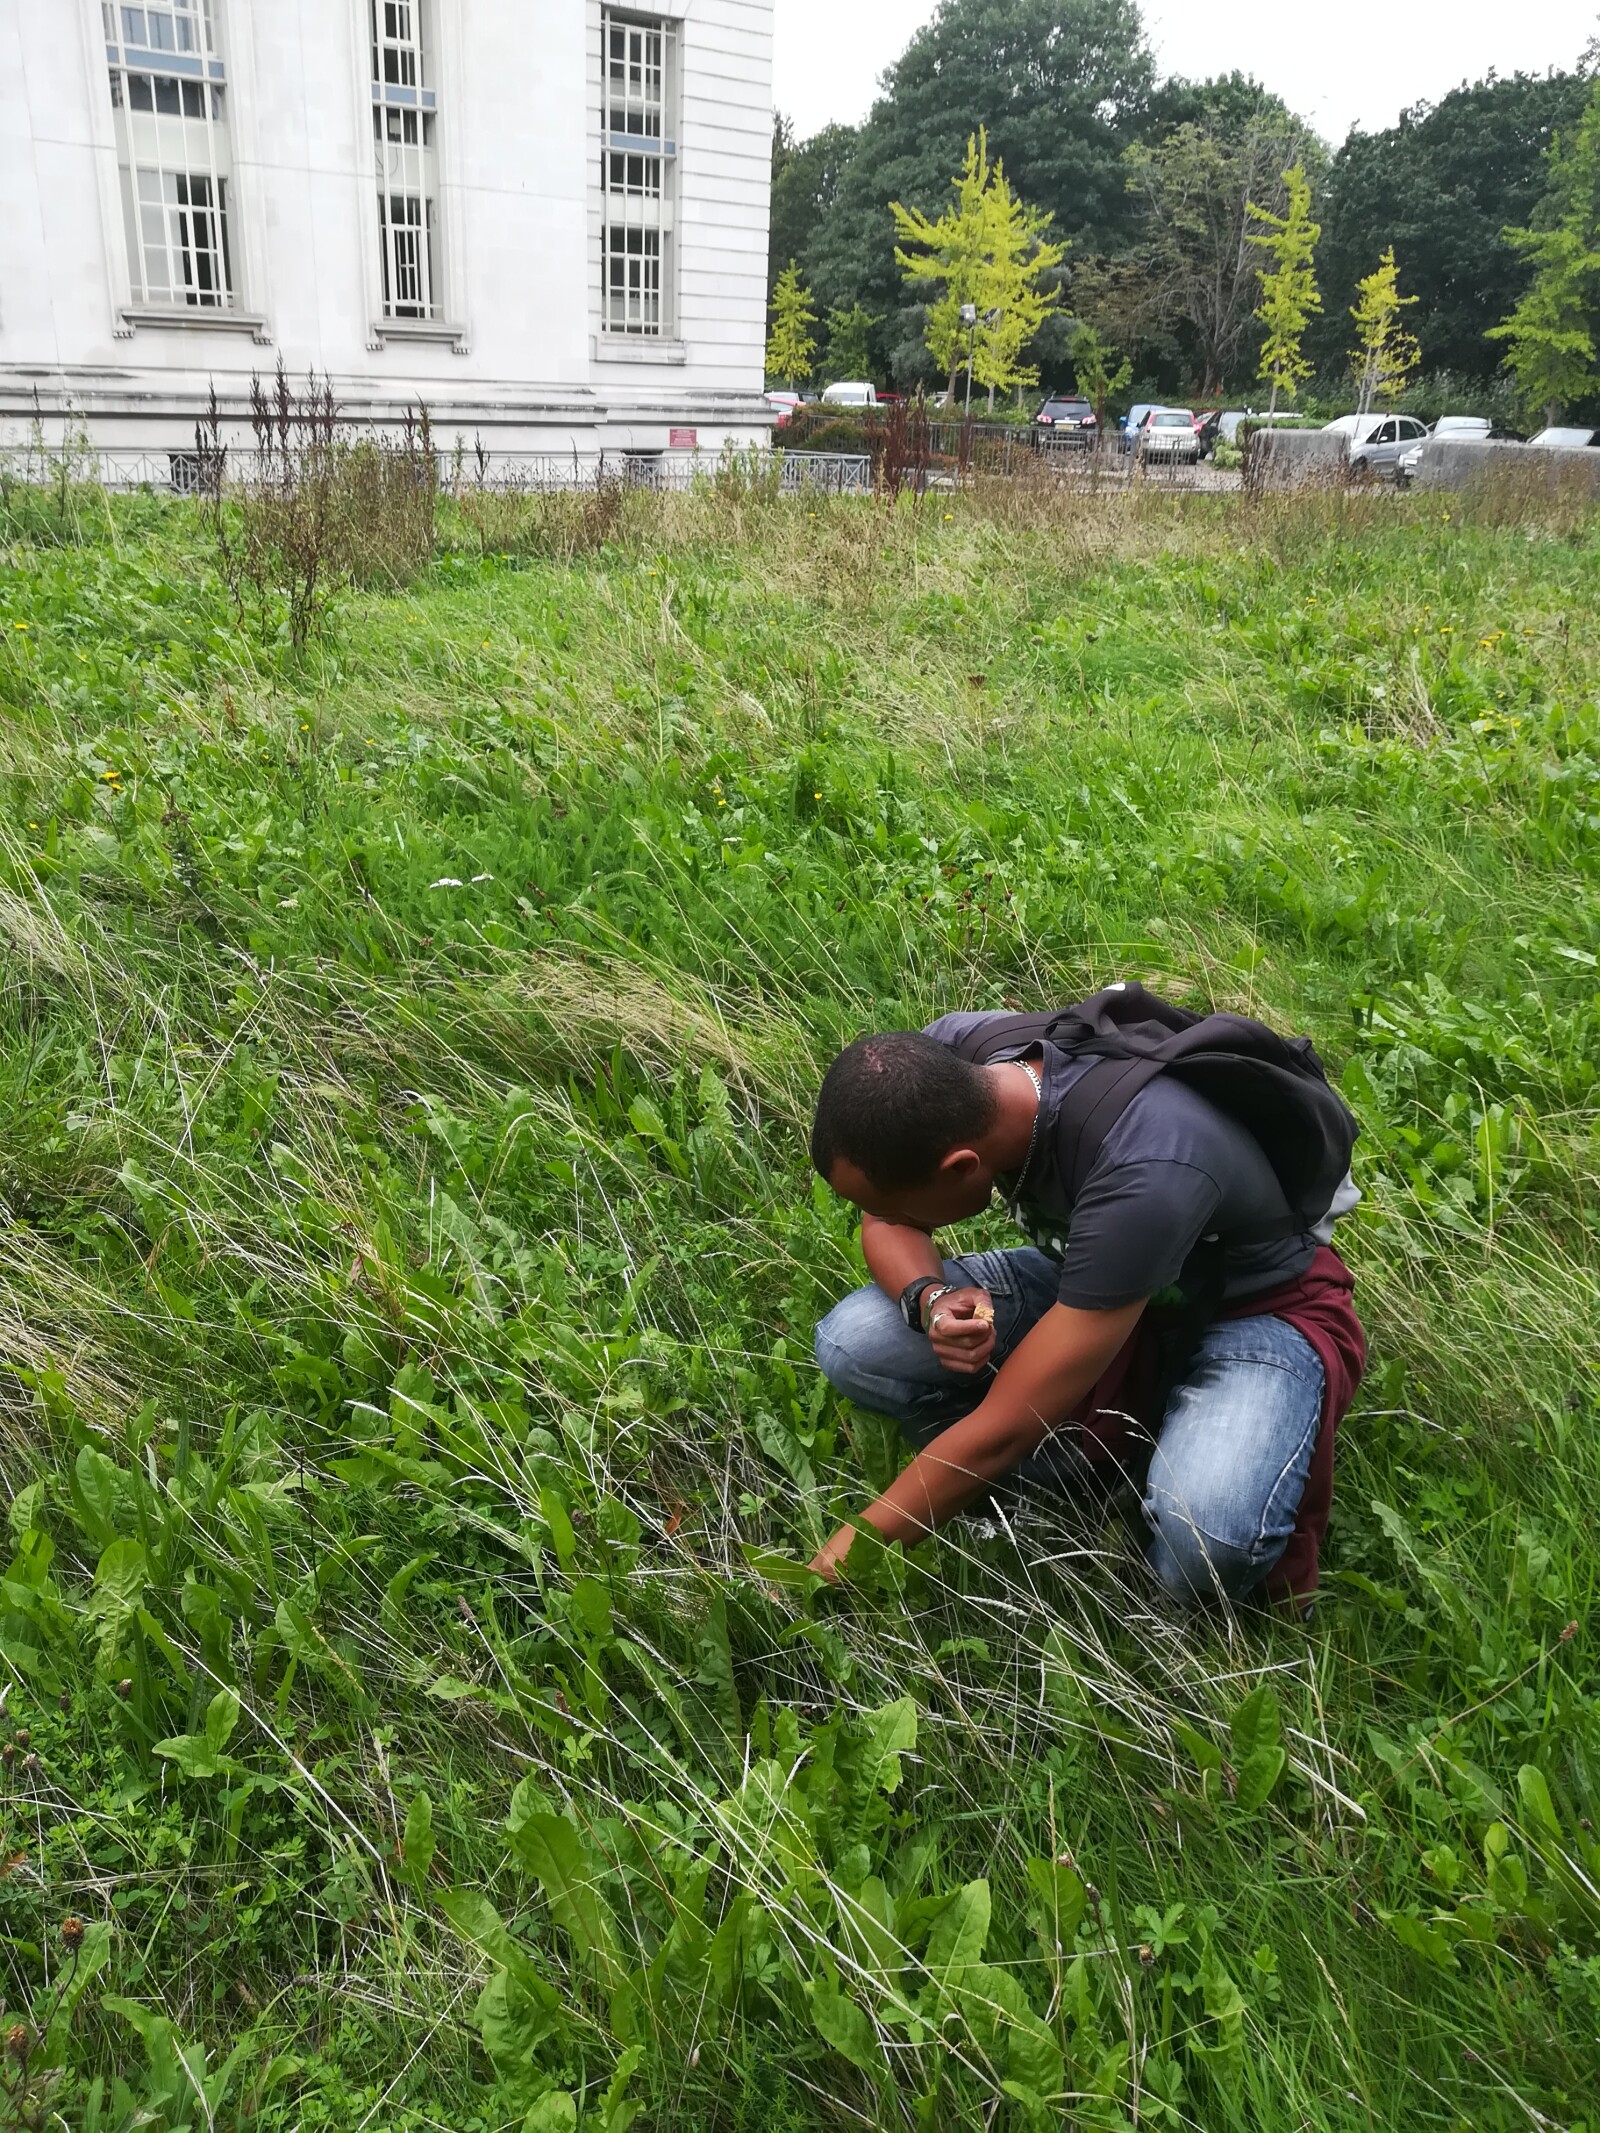 Photograph of a person hunting for invertebrates on the Museum's Urban Meadow